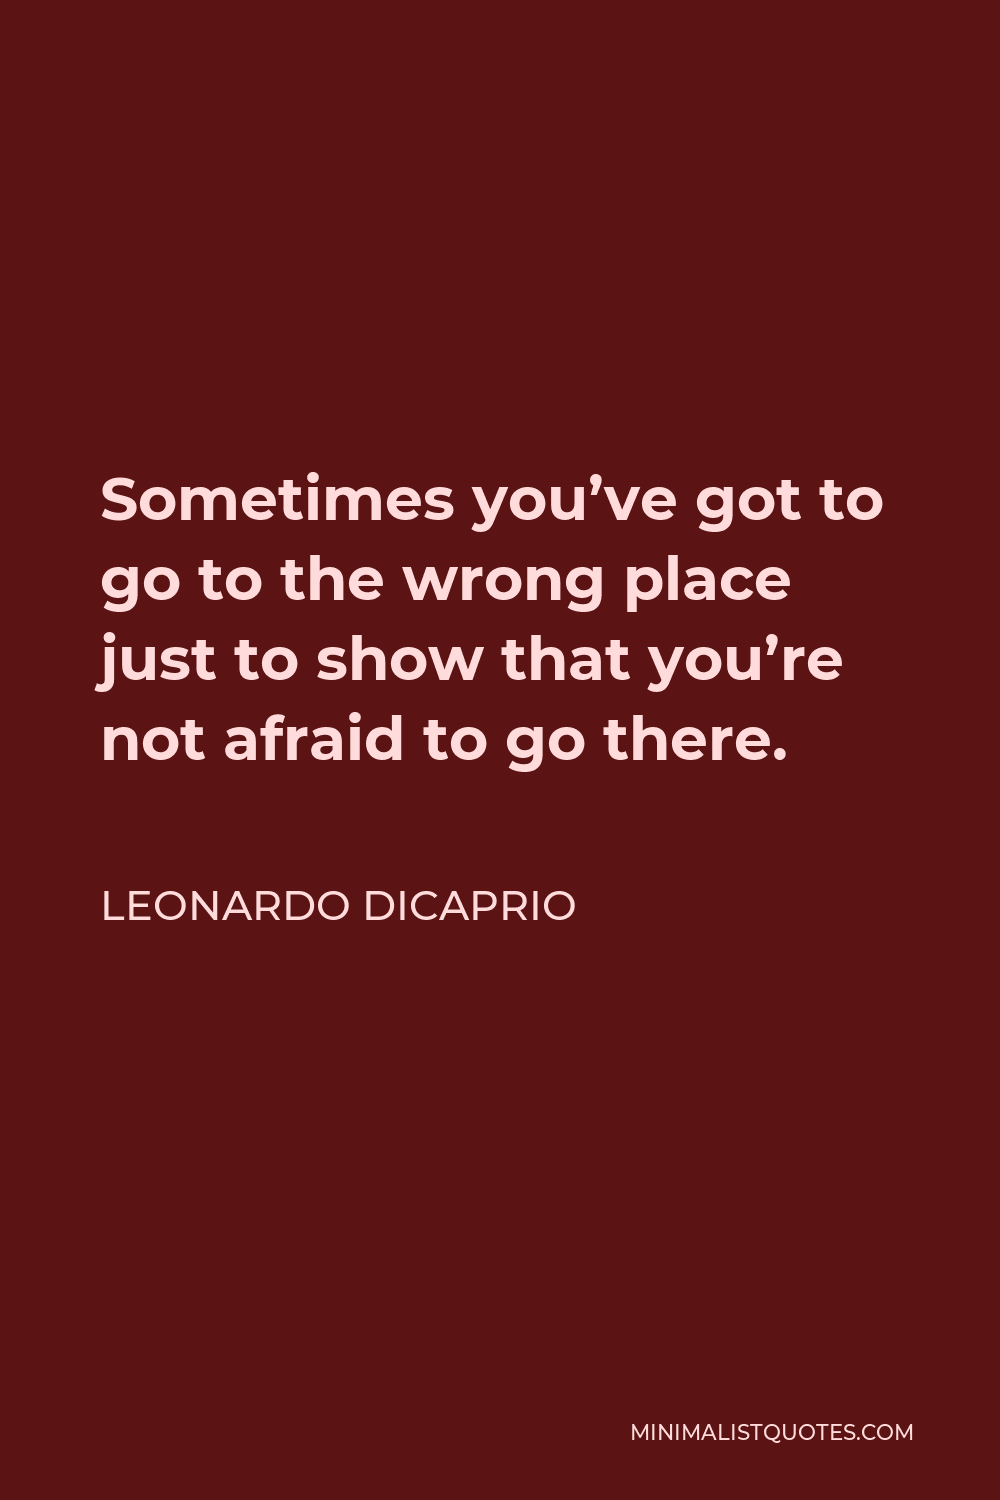 Leonardo DiCaprio Quote - Sometimes you’ve got to go to the wrong place just to show that you’re not afraid to go there.